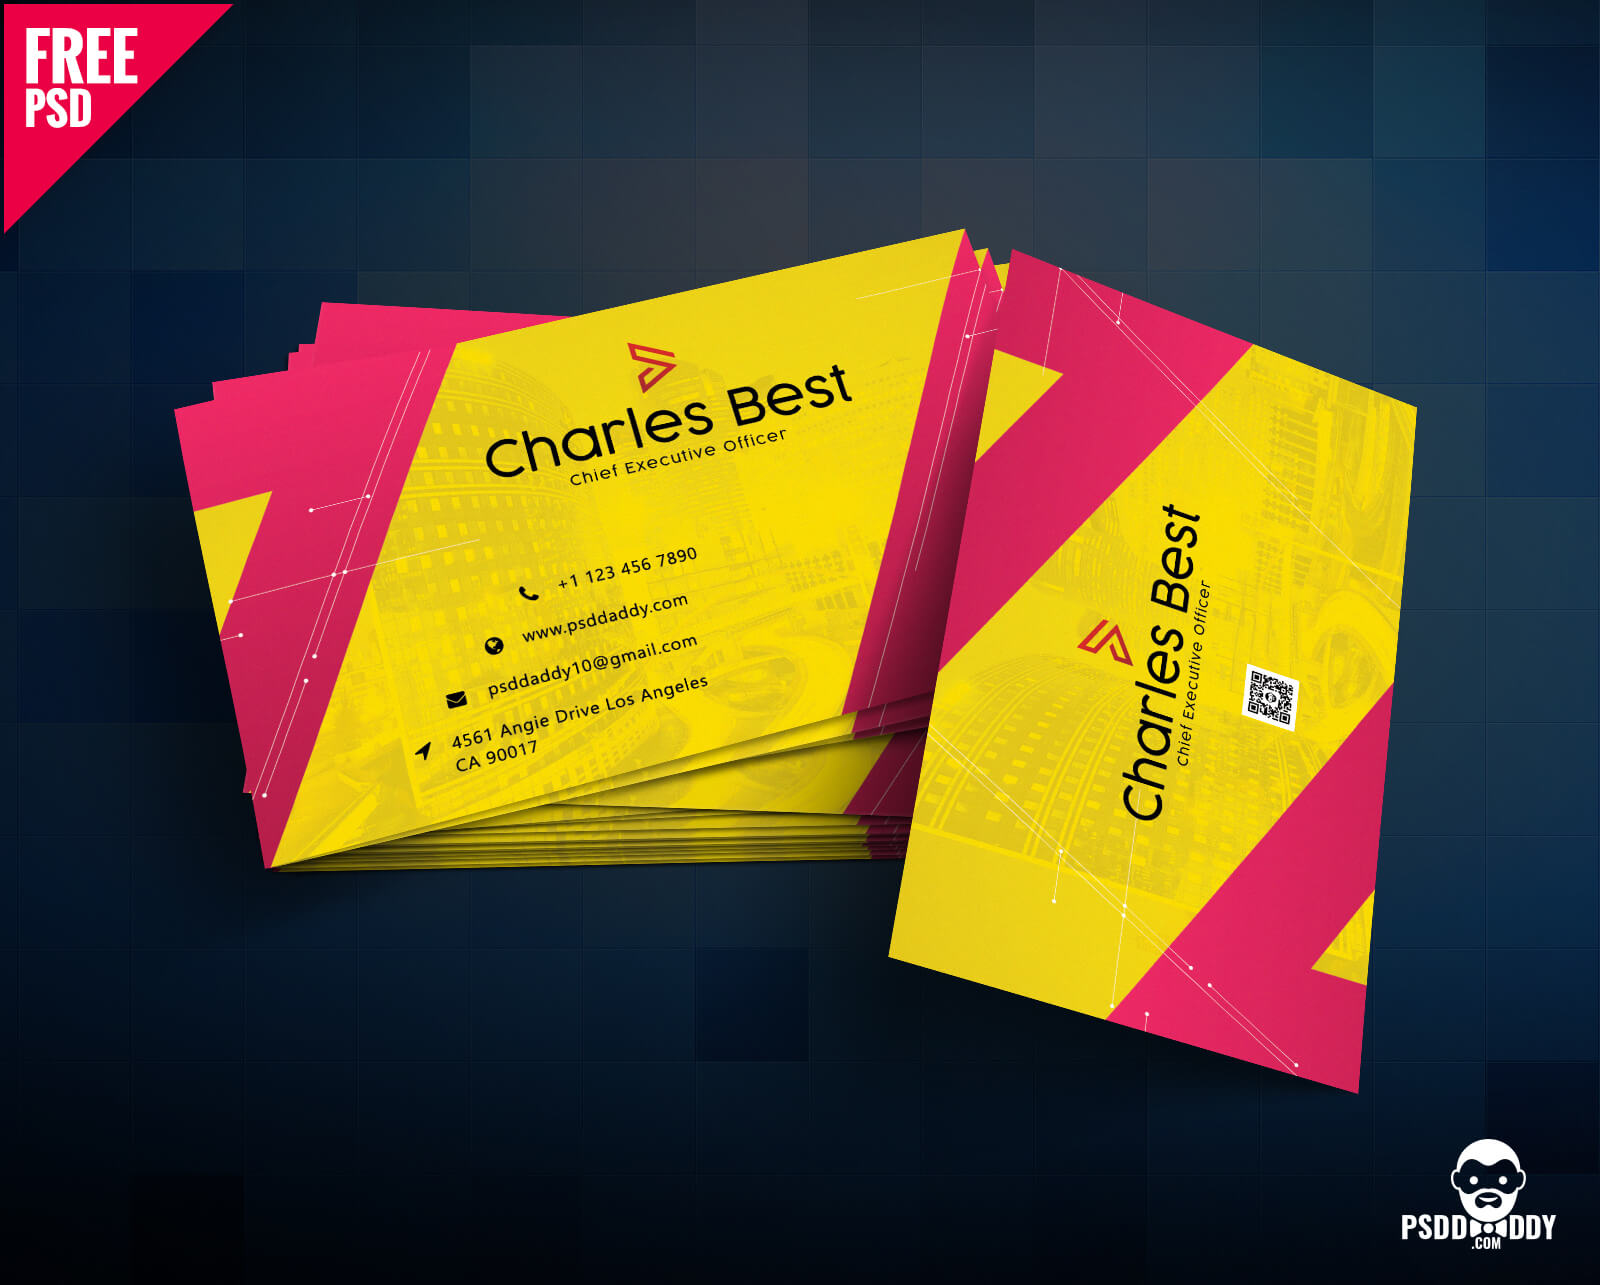 Download] Creative Business Card Free Psd | Psddaddy Within Business Card Template Size Photoshop